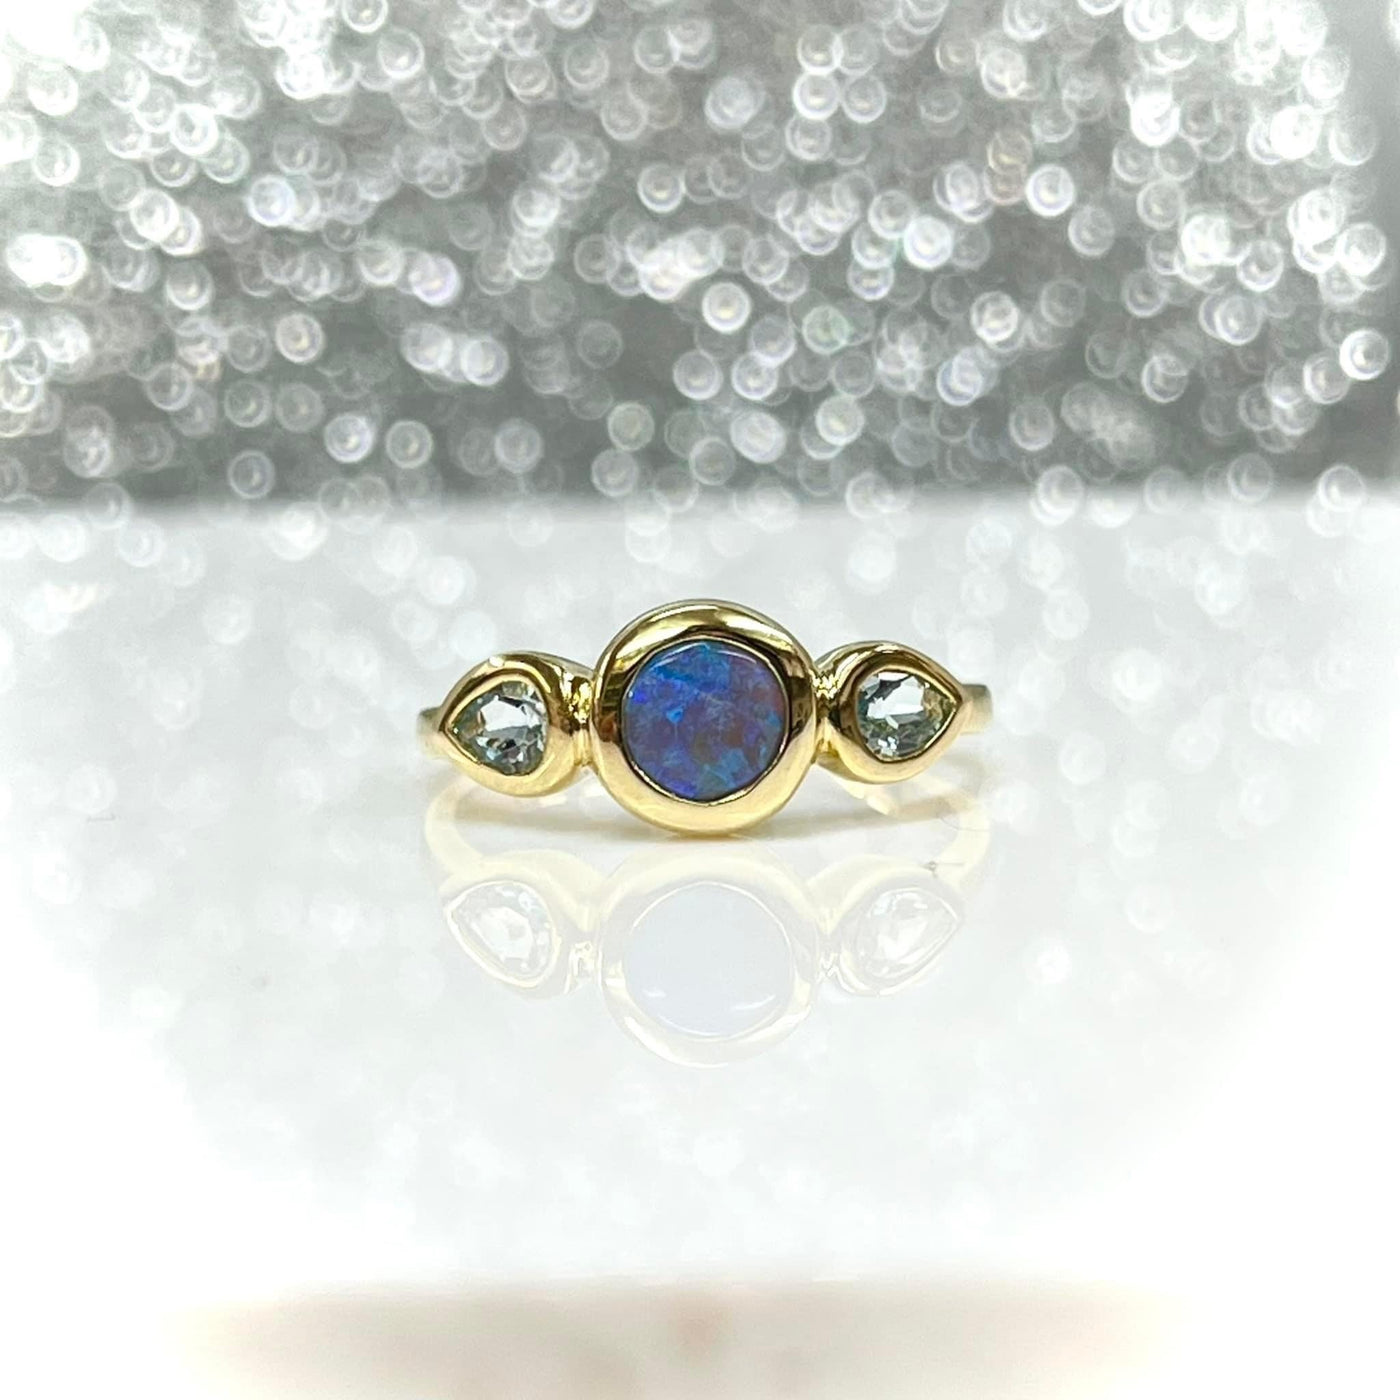 9ct Yellow Gold Opal Ring with Aquamarine